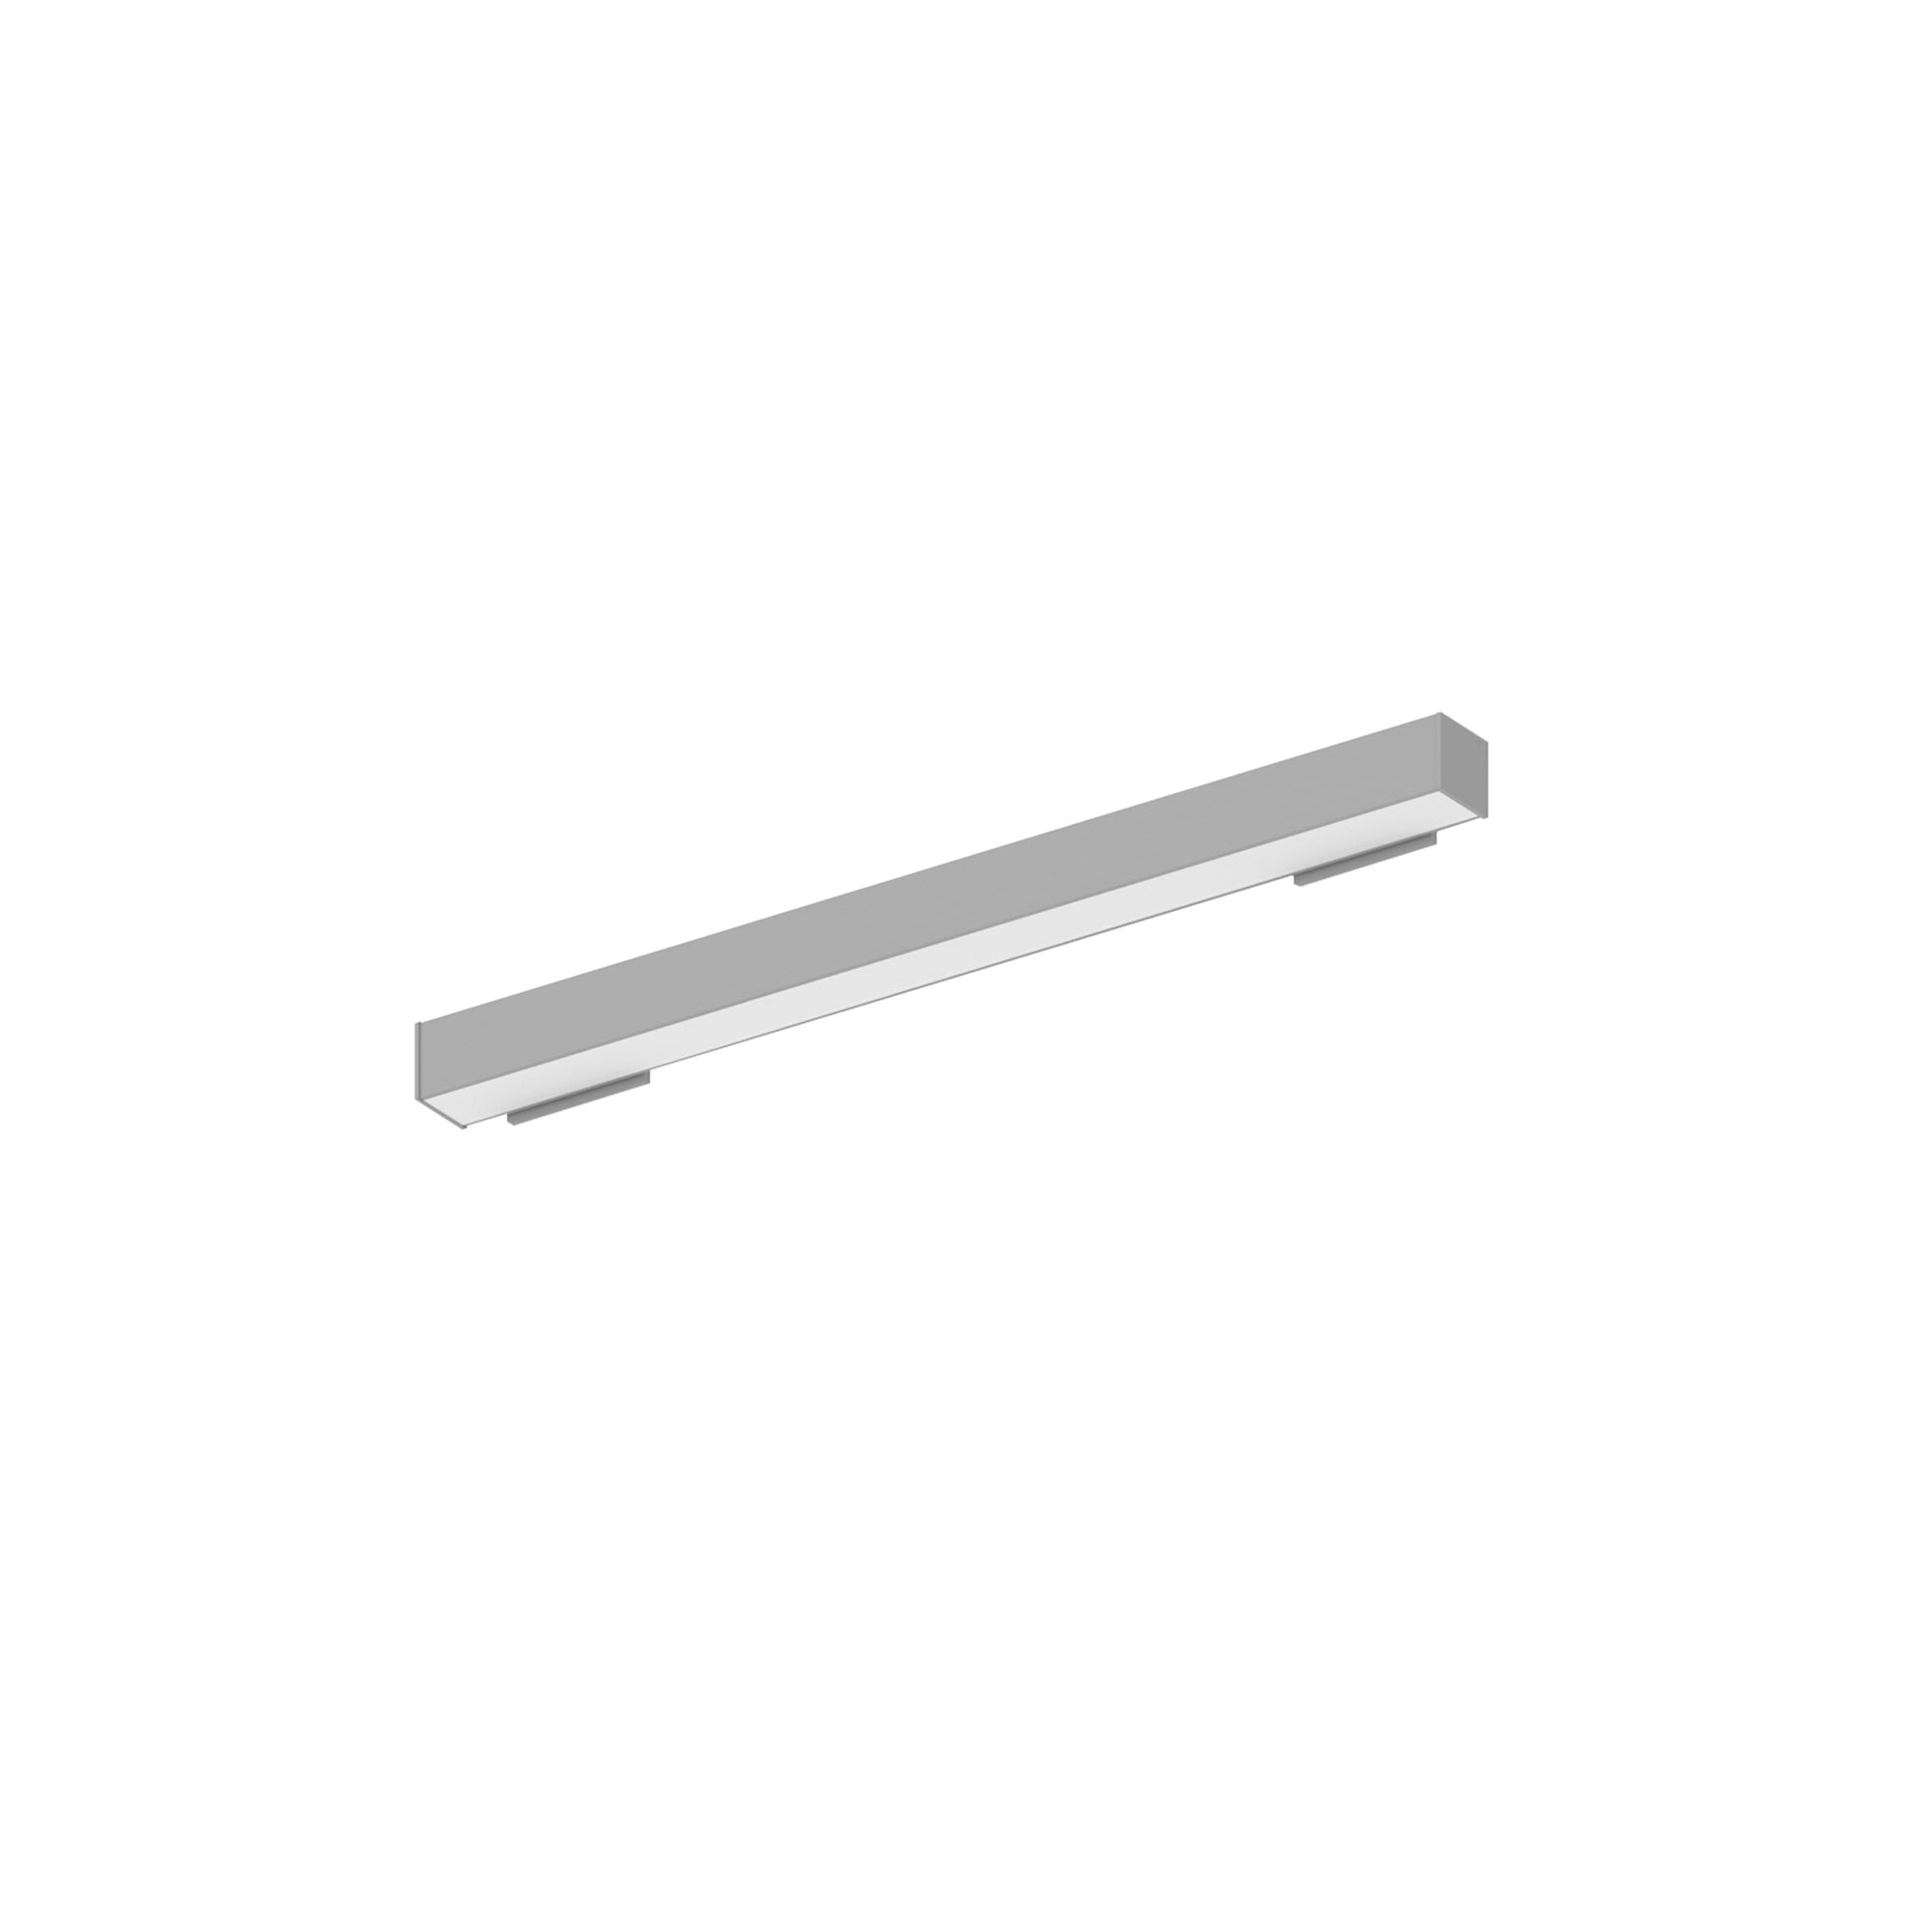 Nora Lighting NWLIN-21035A/L2P-R2 - Linear - 2' L-Line LED Wall Mount Linear, 2100lm / 3500K, 2 Inchx4 Inch Left Plate & 2 Inchx4 Inch Right Plate, Left Power Feed, Aluminum Finish